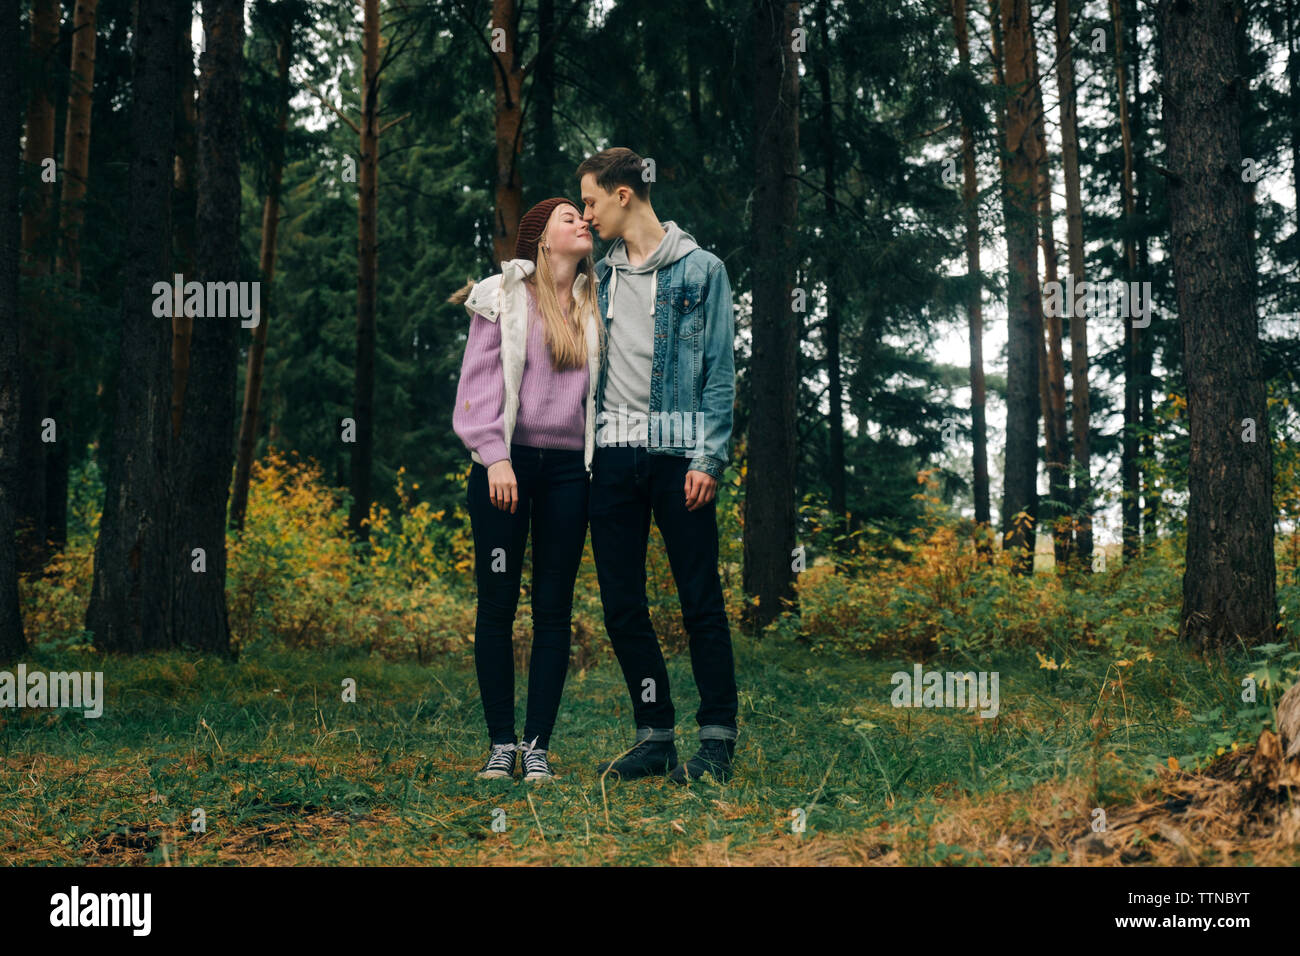 Romantic young couple standing on grassy field against trees in forest Stock Photo